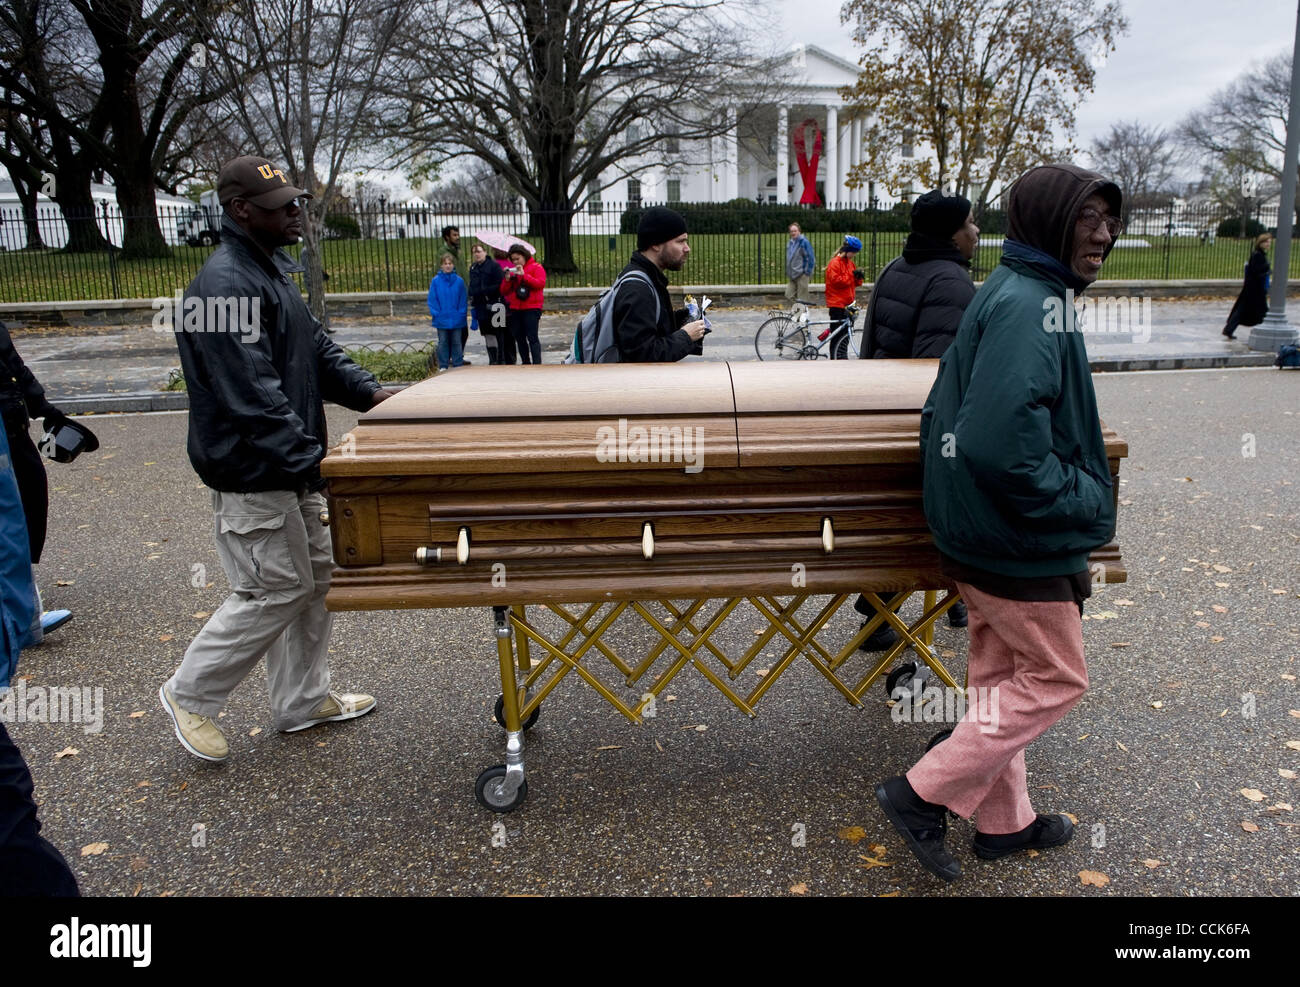 A group of people push a casket and gather in front of the White House to bring awareness of the worldwide AIDS epidemic  to the Obama administration, in Washington, D.C., December 1, 2010. Photograph ©Mannie Garcia Stock Photo